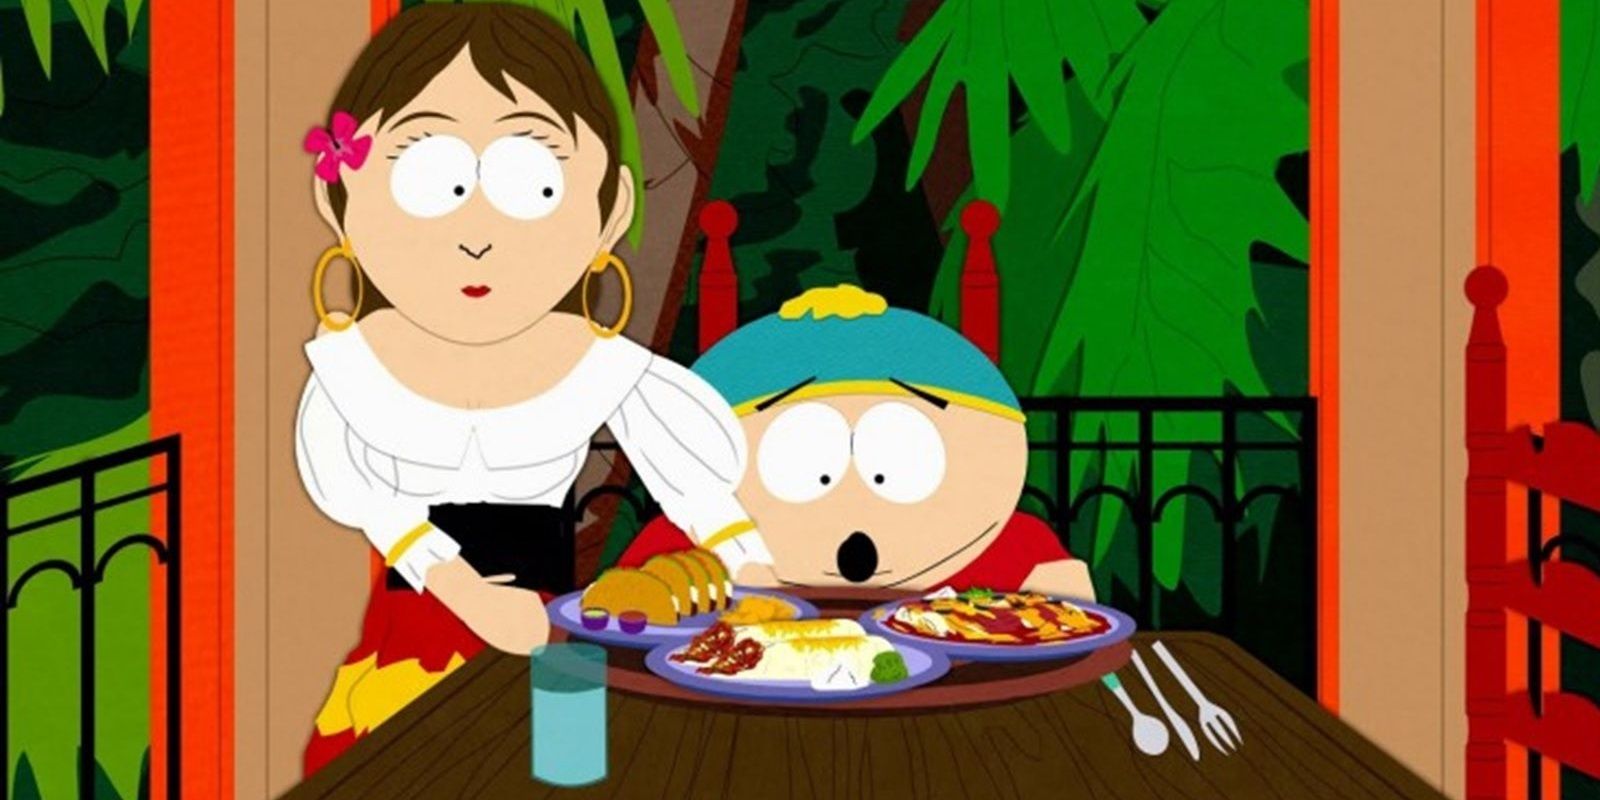 Eric gasping as a waiter serves him food in South Park.